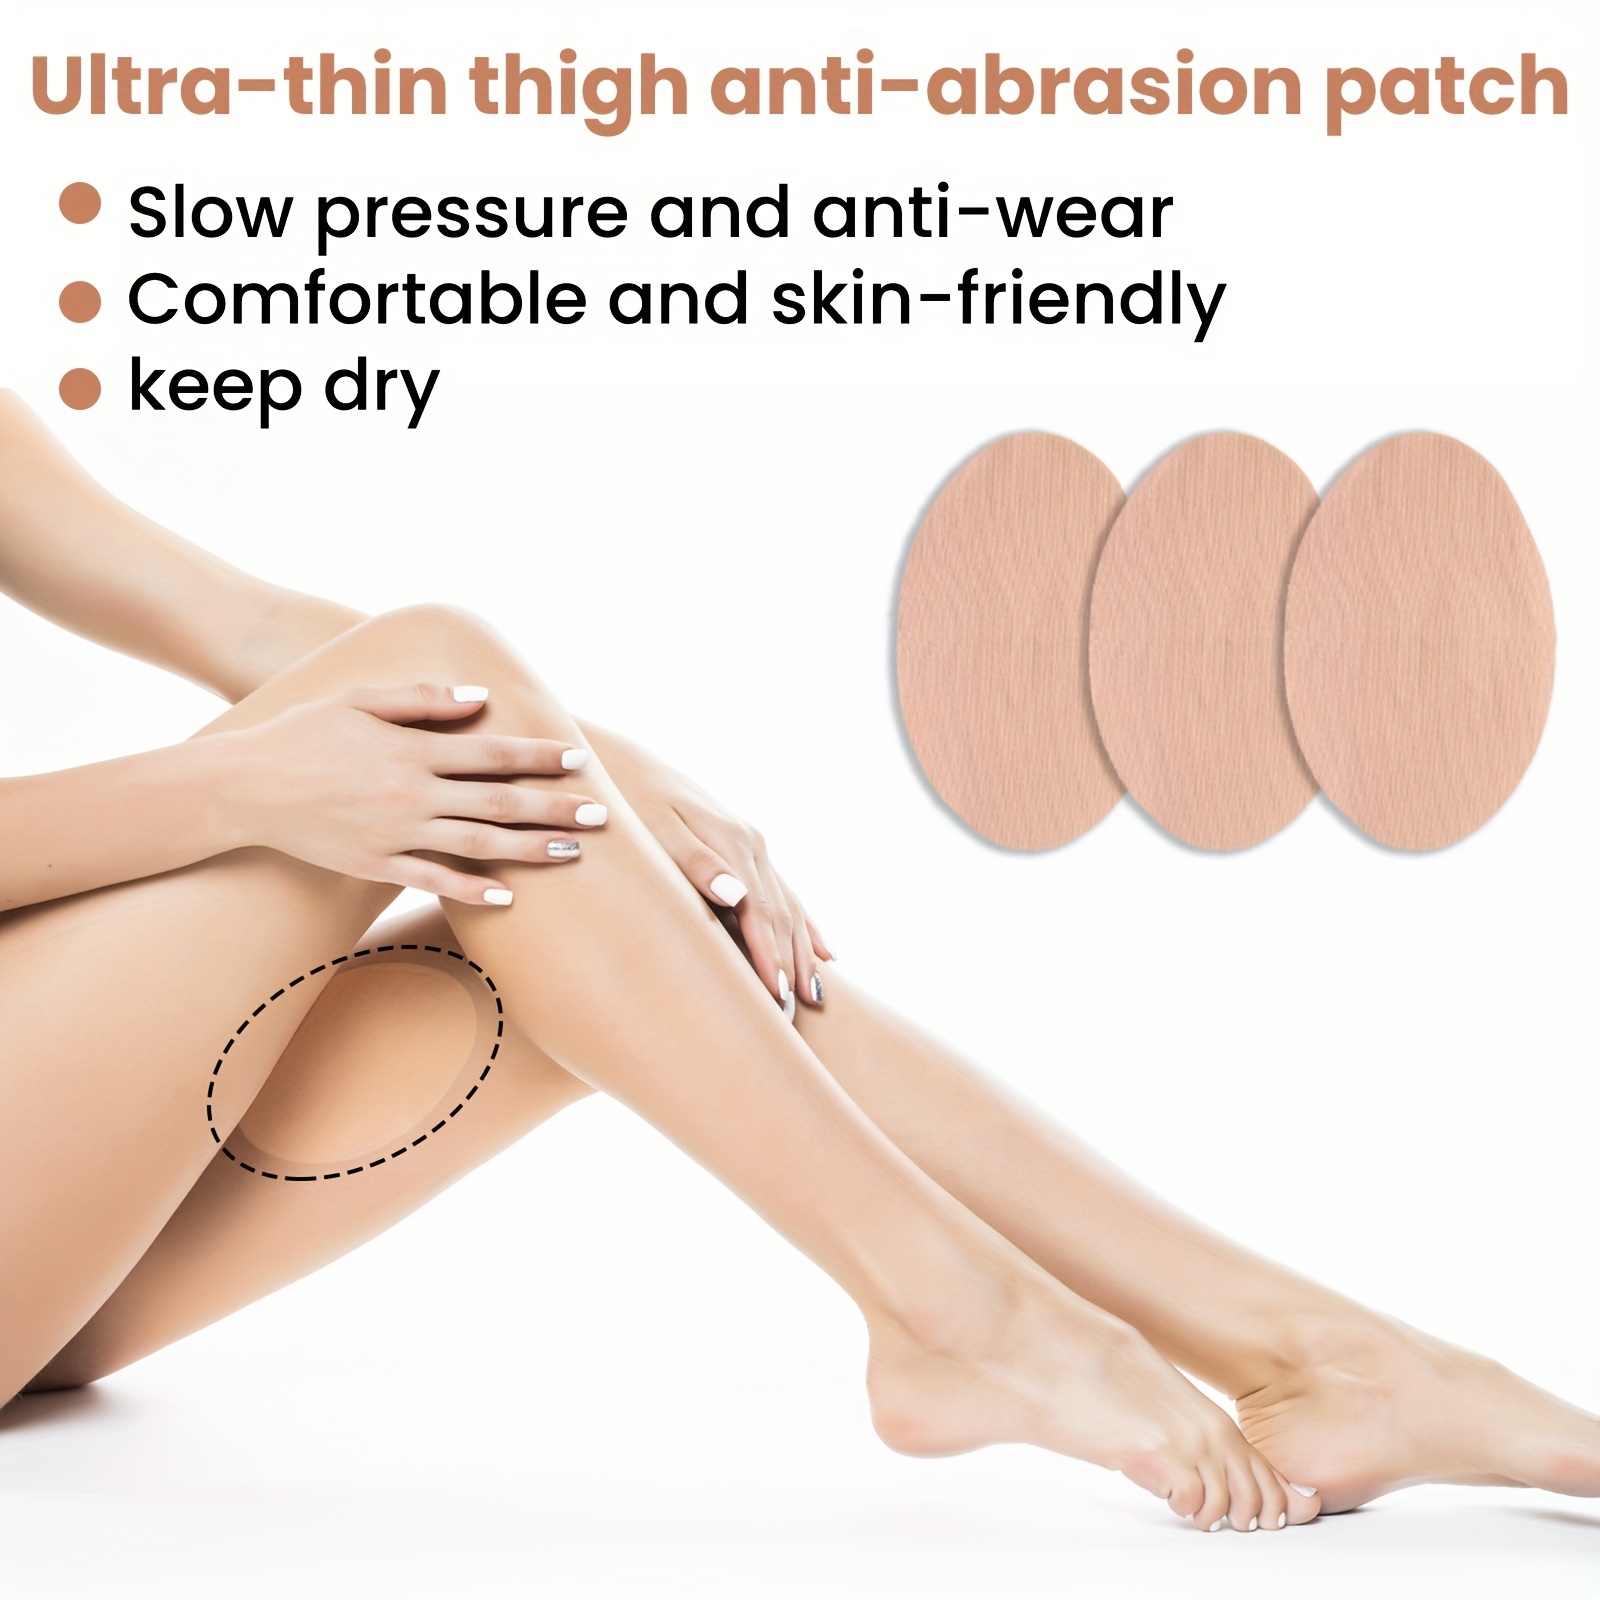 Thigh Inner Chafing Sticker Paste Inner Thigh Wear Patch Foot Care